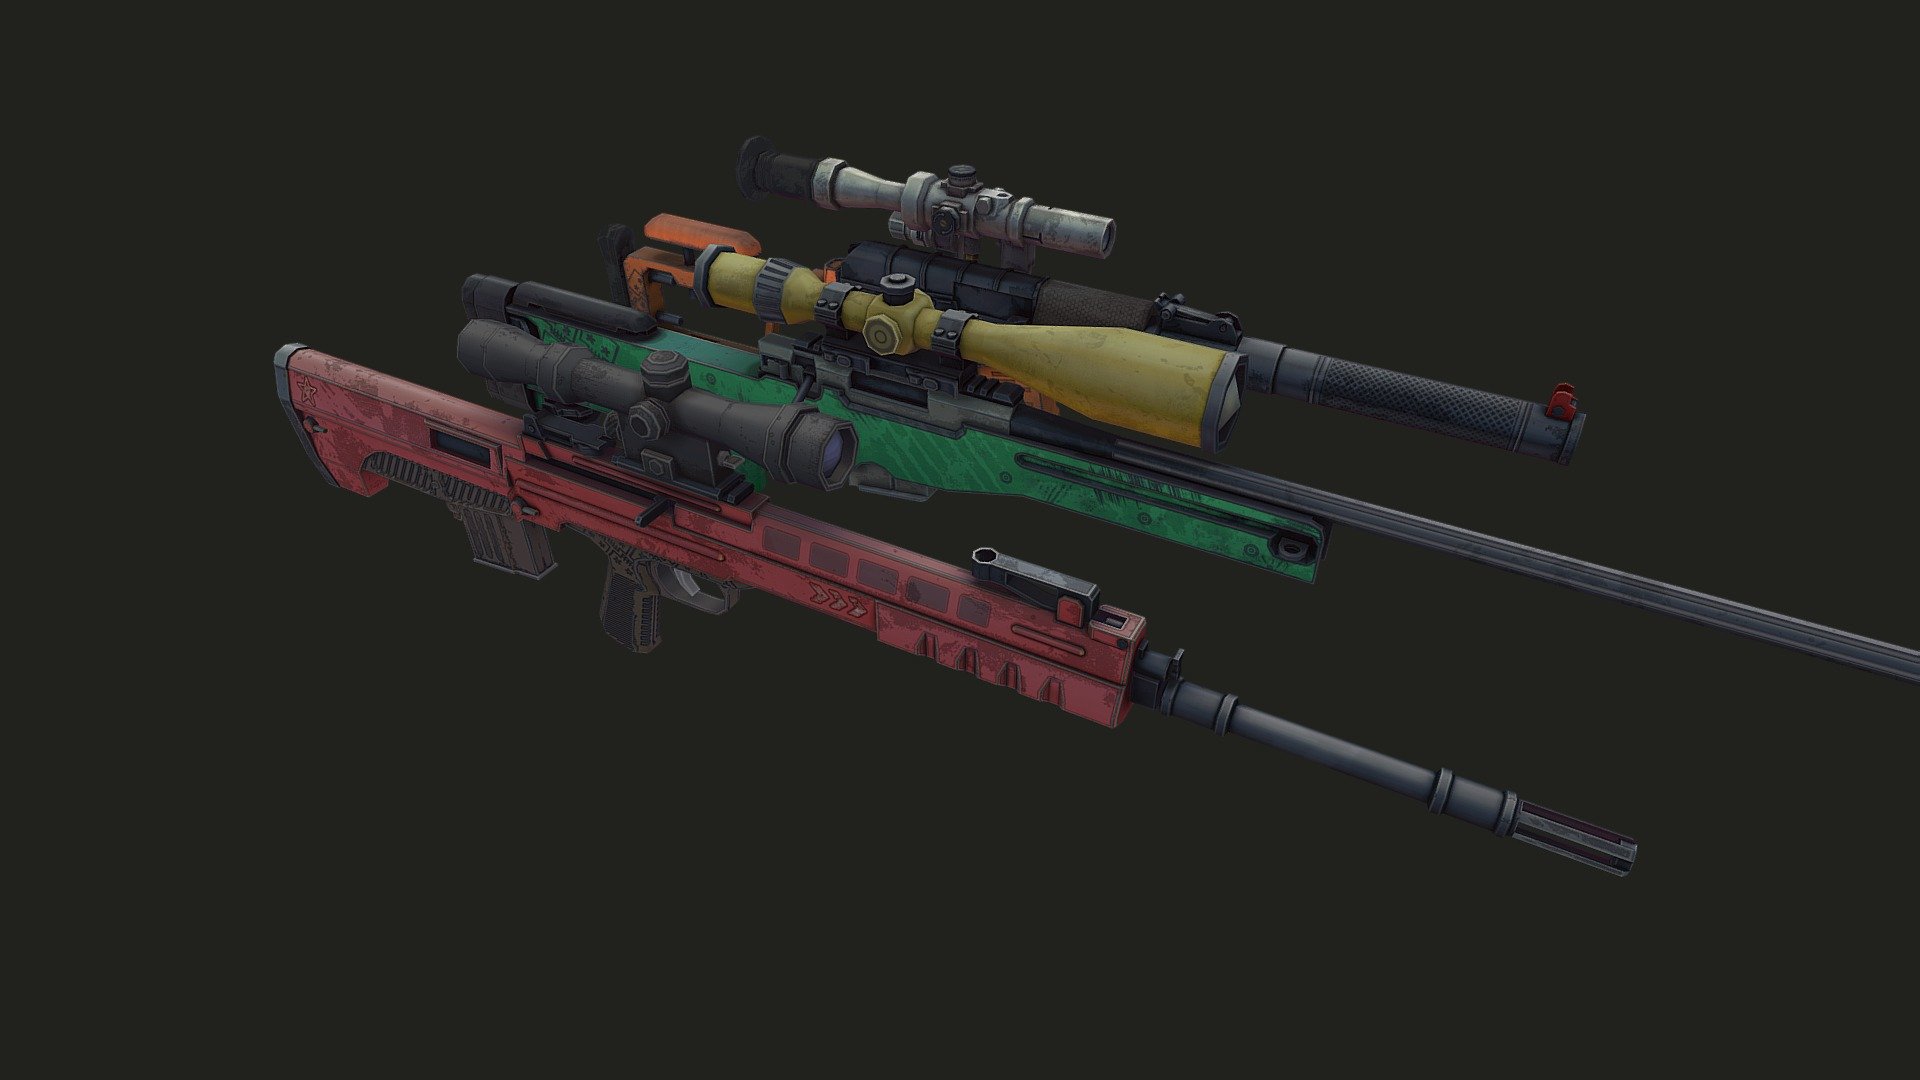 Low-poly weapon models:
L118A1
QBU-88
VSS_Vintorez
The set has a separate UV for each weapon
texture resolution 2048x2048, you can compress 512x512

The attached .zip contains:
file. fbx
diffuse textures, AO maps. Format (png) - Sniper rifle - 3D model by Johnny Starkov (@JohnnyStark) 3d model